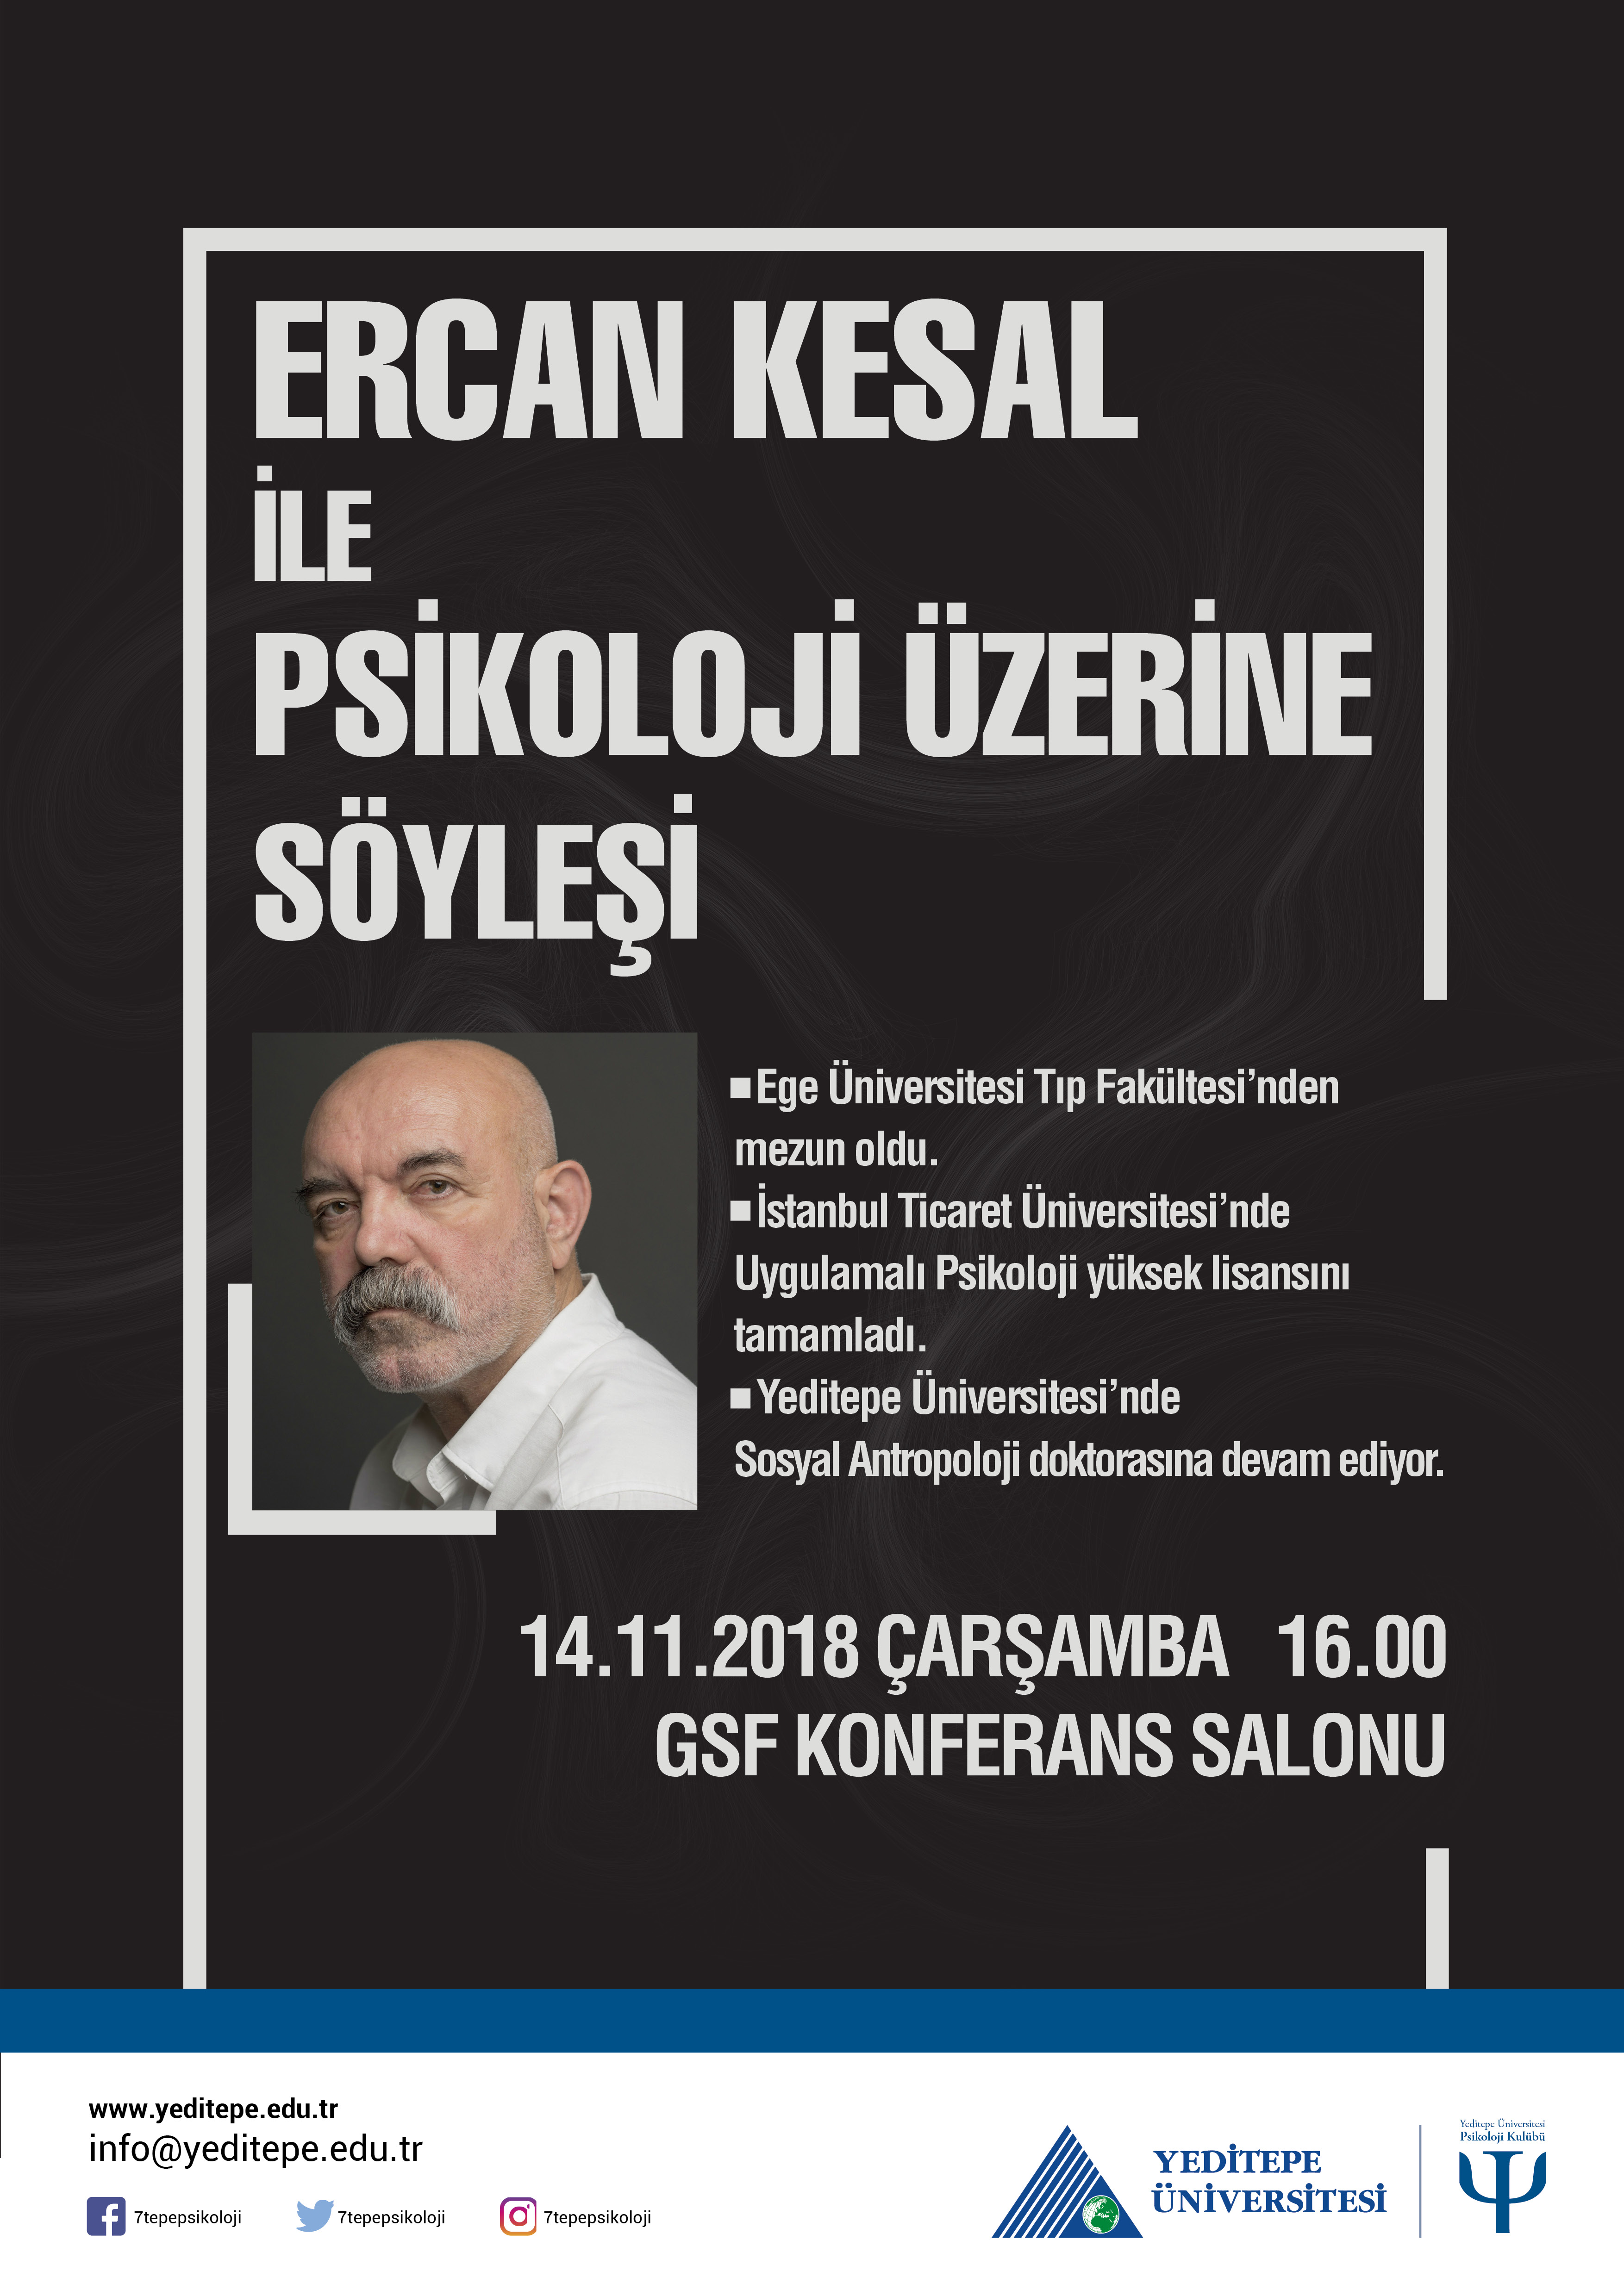 Talks on Psychology with Ercan Kesal